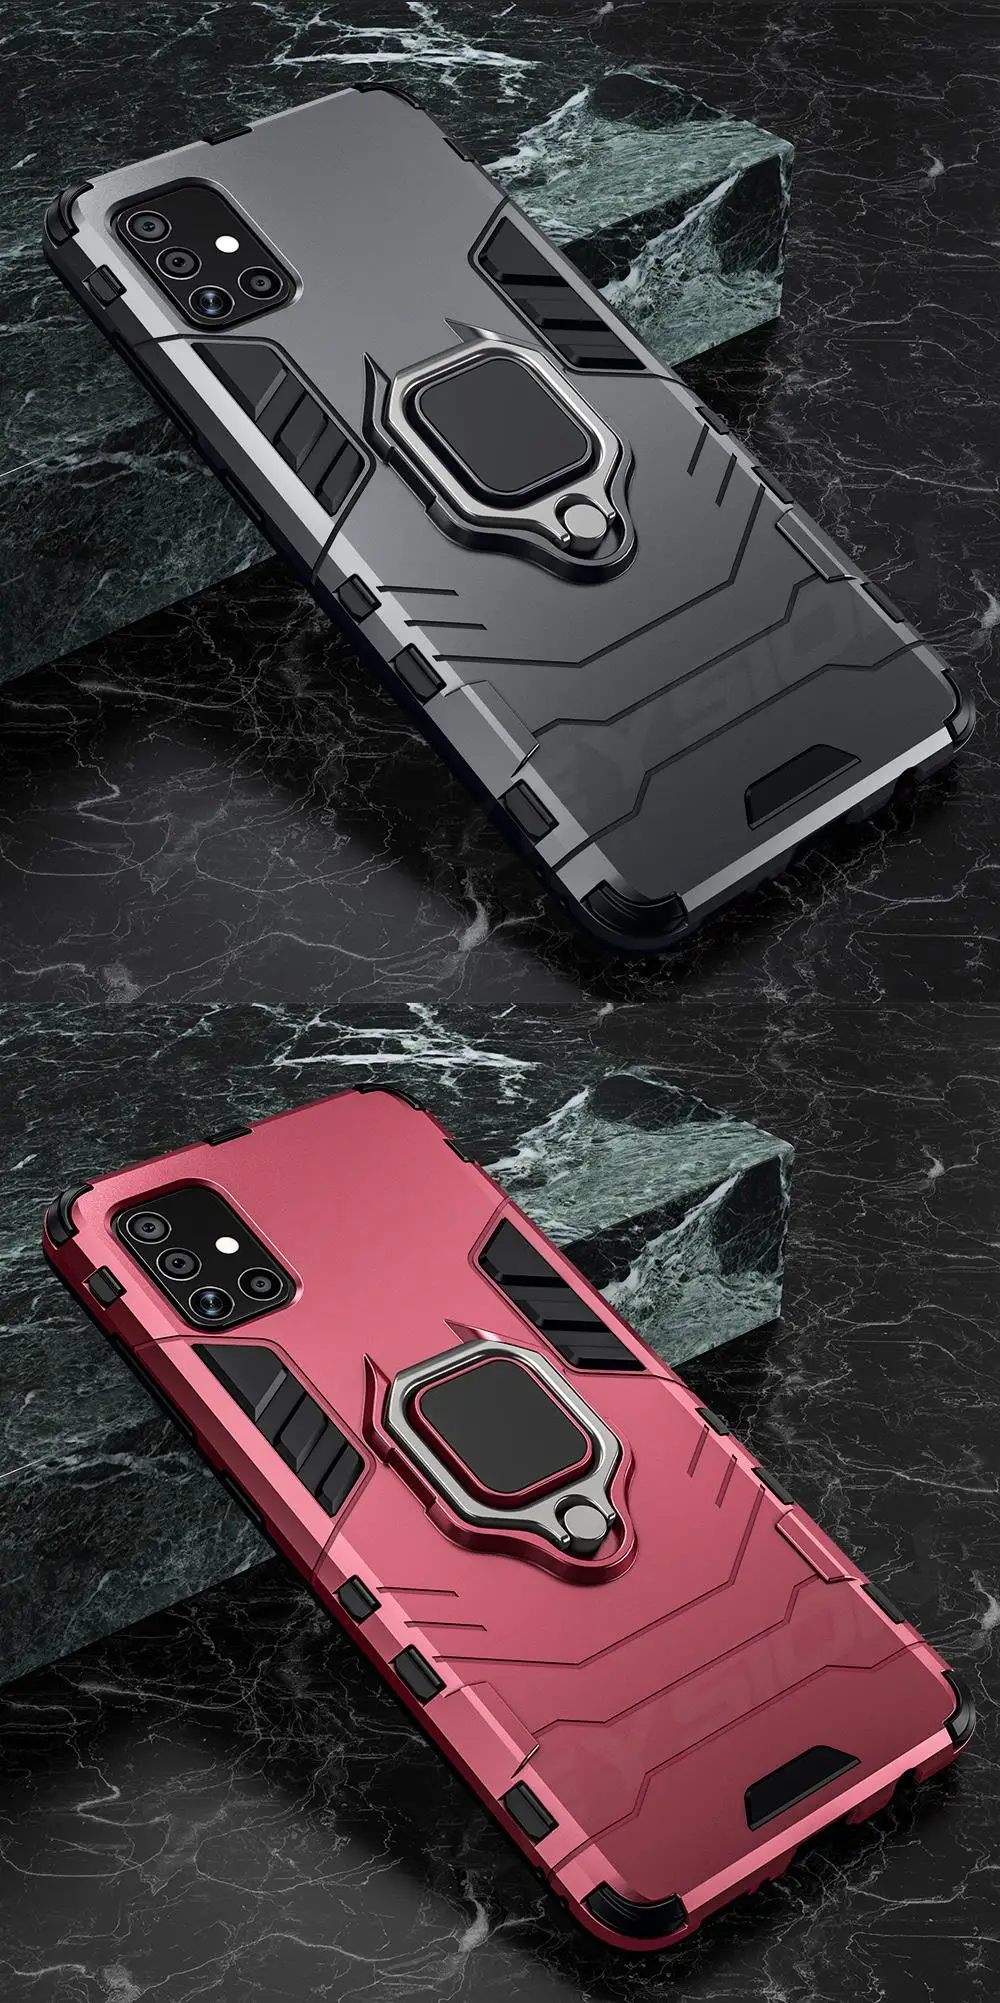 KEYSION Shockproof Case for Samsung A51 A71 A31 A52 A72 Phone Cover for Galaxy S20 S21 Ultra S10 Lite Note 10+ A50 A70 A12 A21S galaxy s22+ clear case